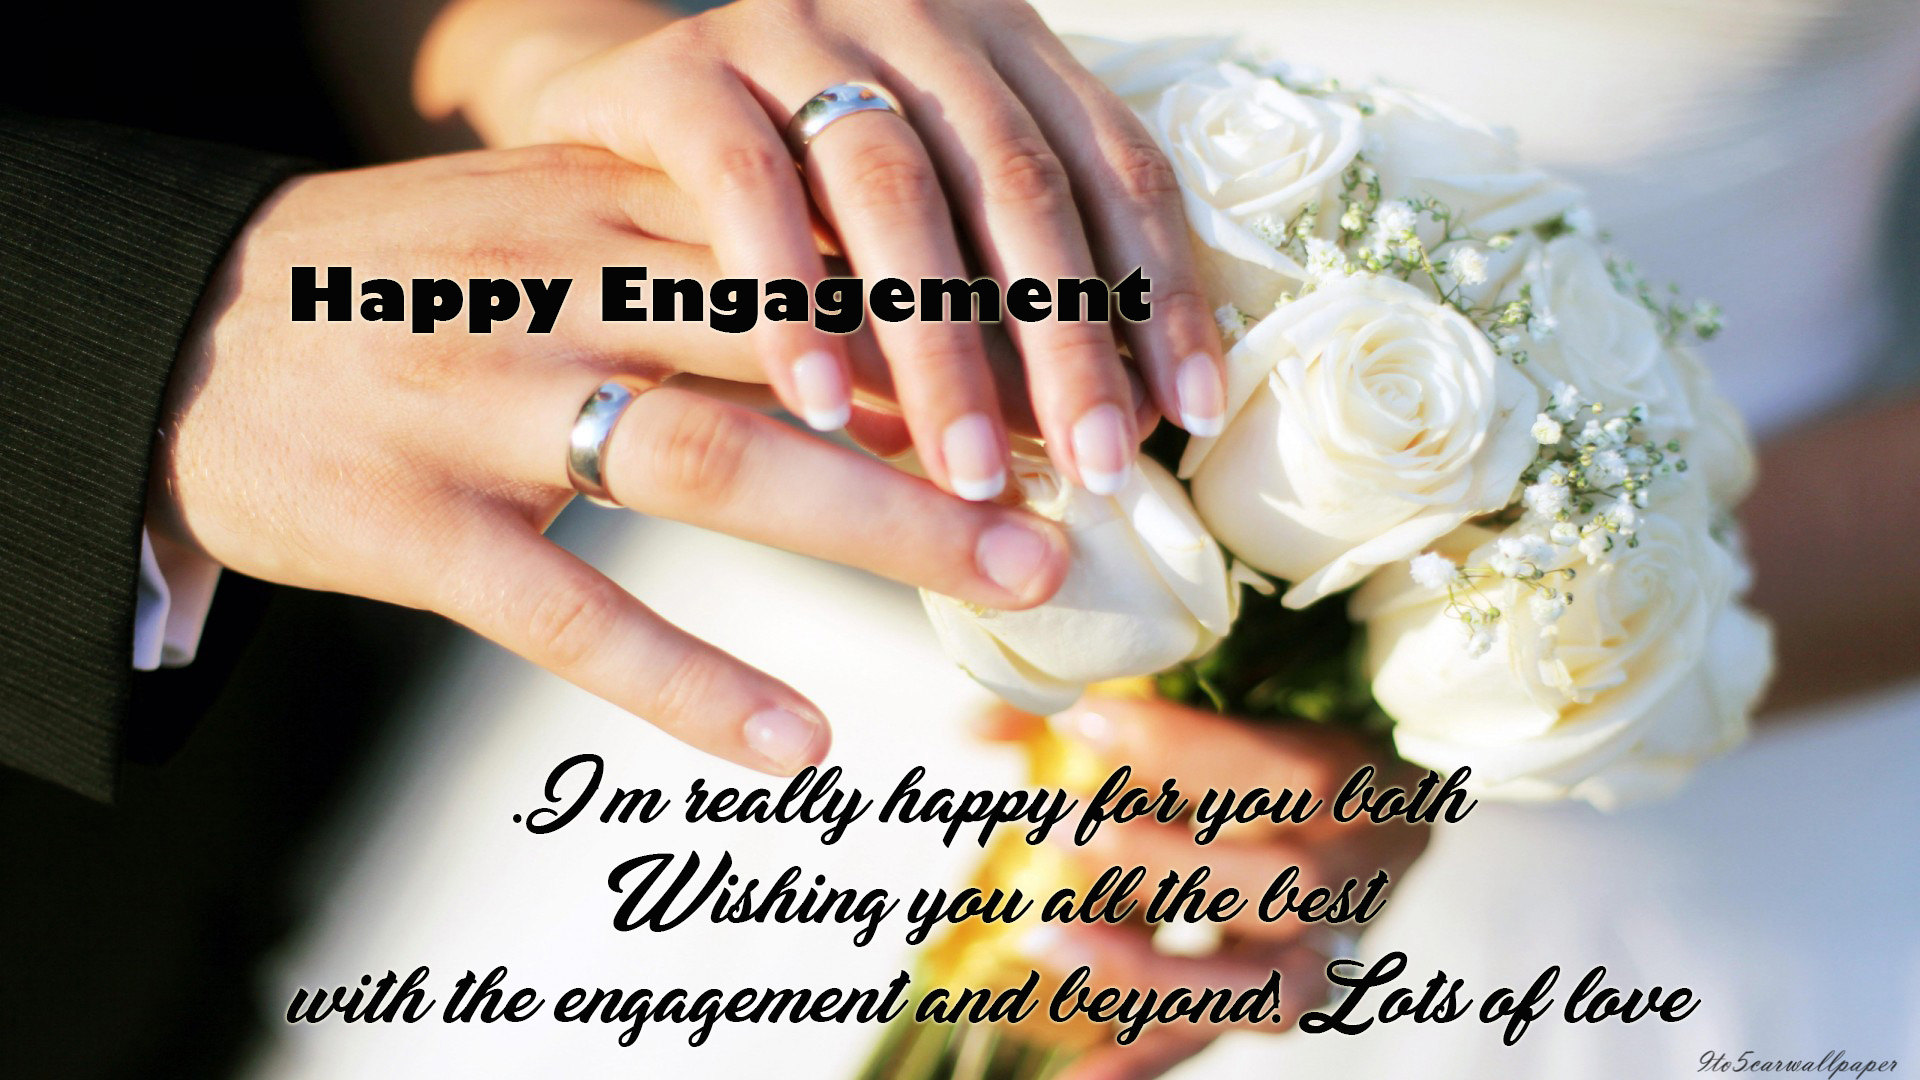 Happy Engagement | Congratulations on Engagement - 9to5 Car Wallpapers